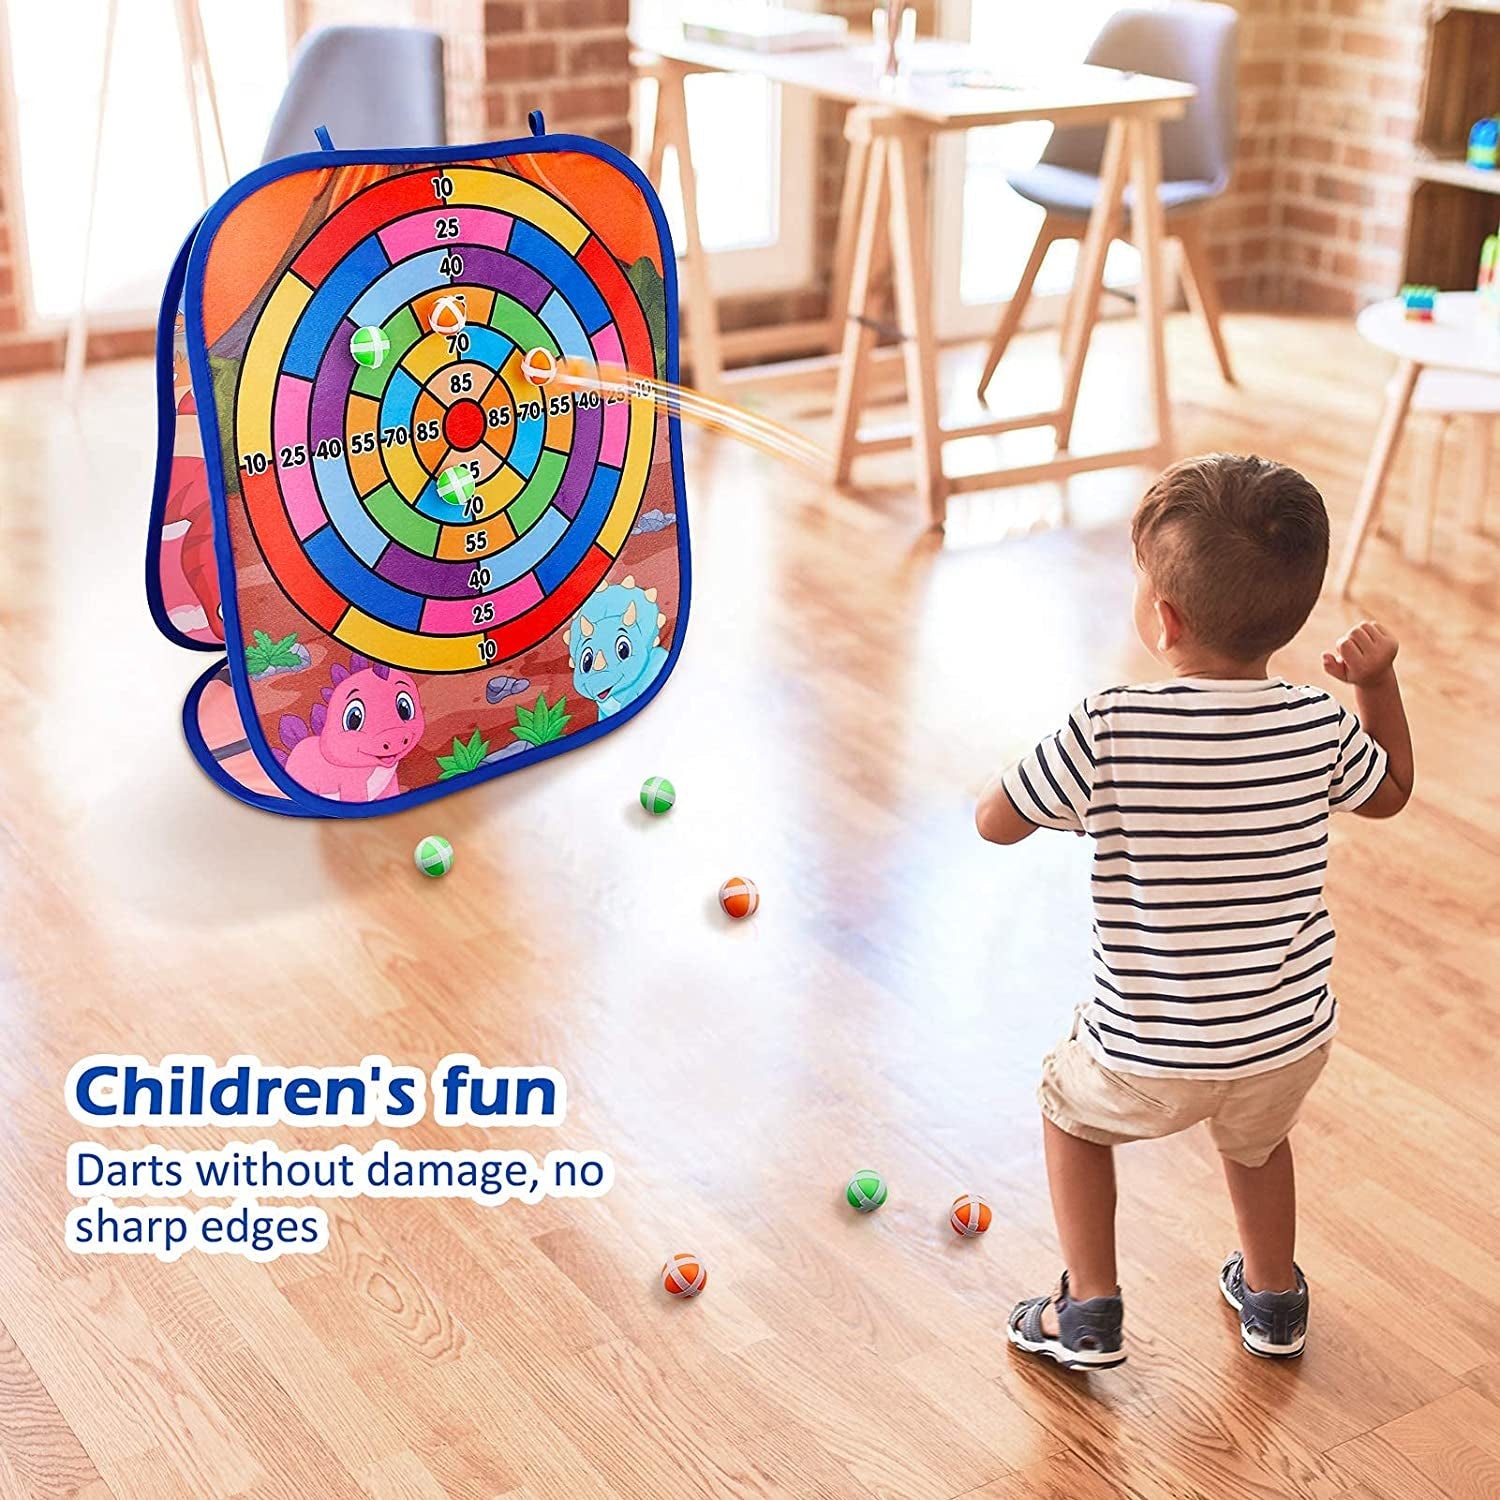 "Fun Animal Bean Bag Toss Game - Perfect Outdoor Party Toy for Kids! Ideal Gift for Boys' Birthdays or Christmas - Suitable for Toddlers Ages 3-6"